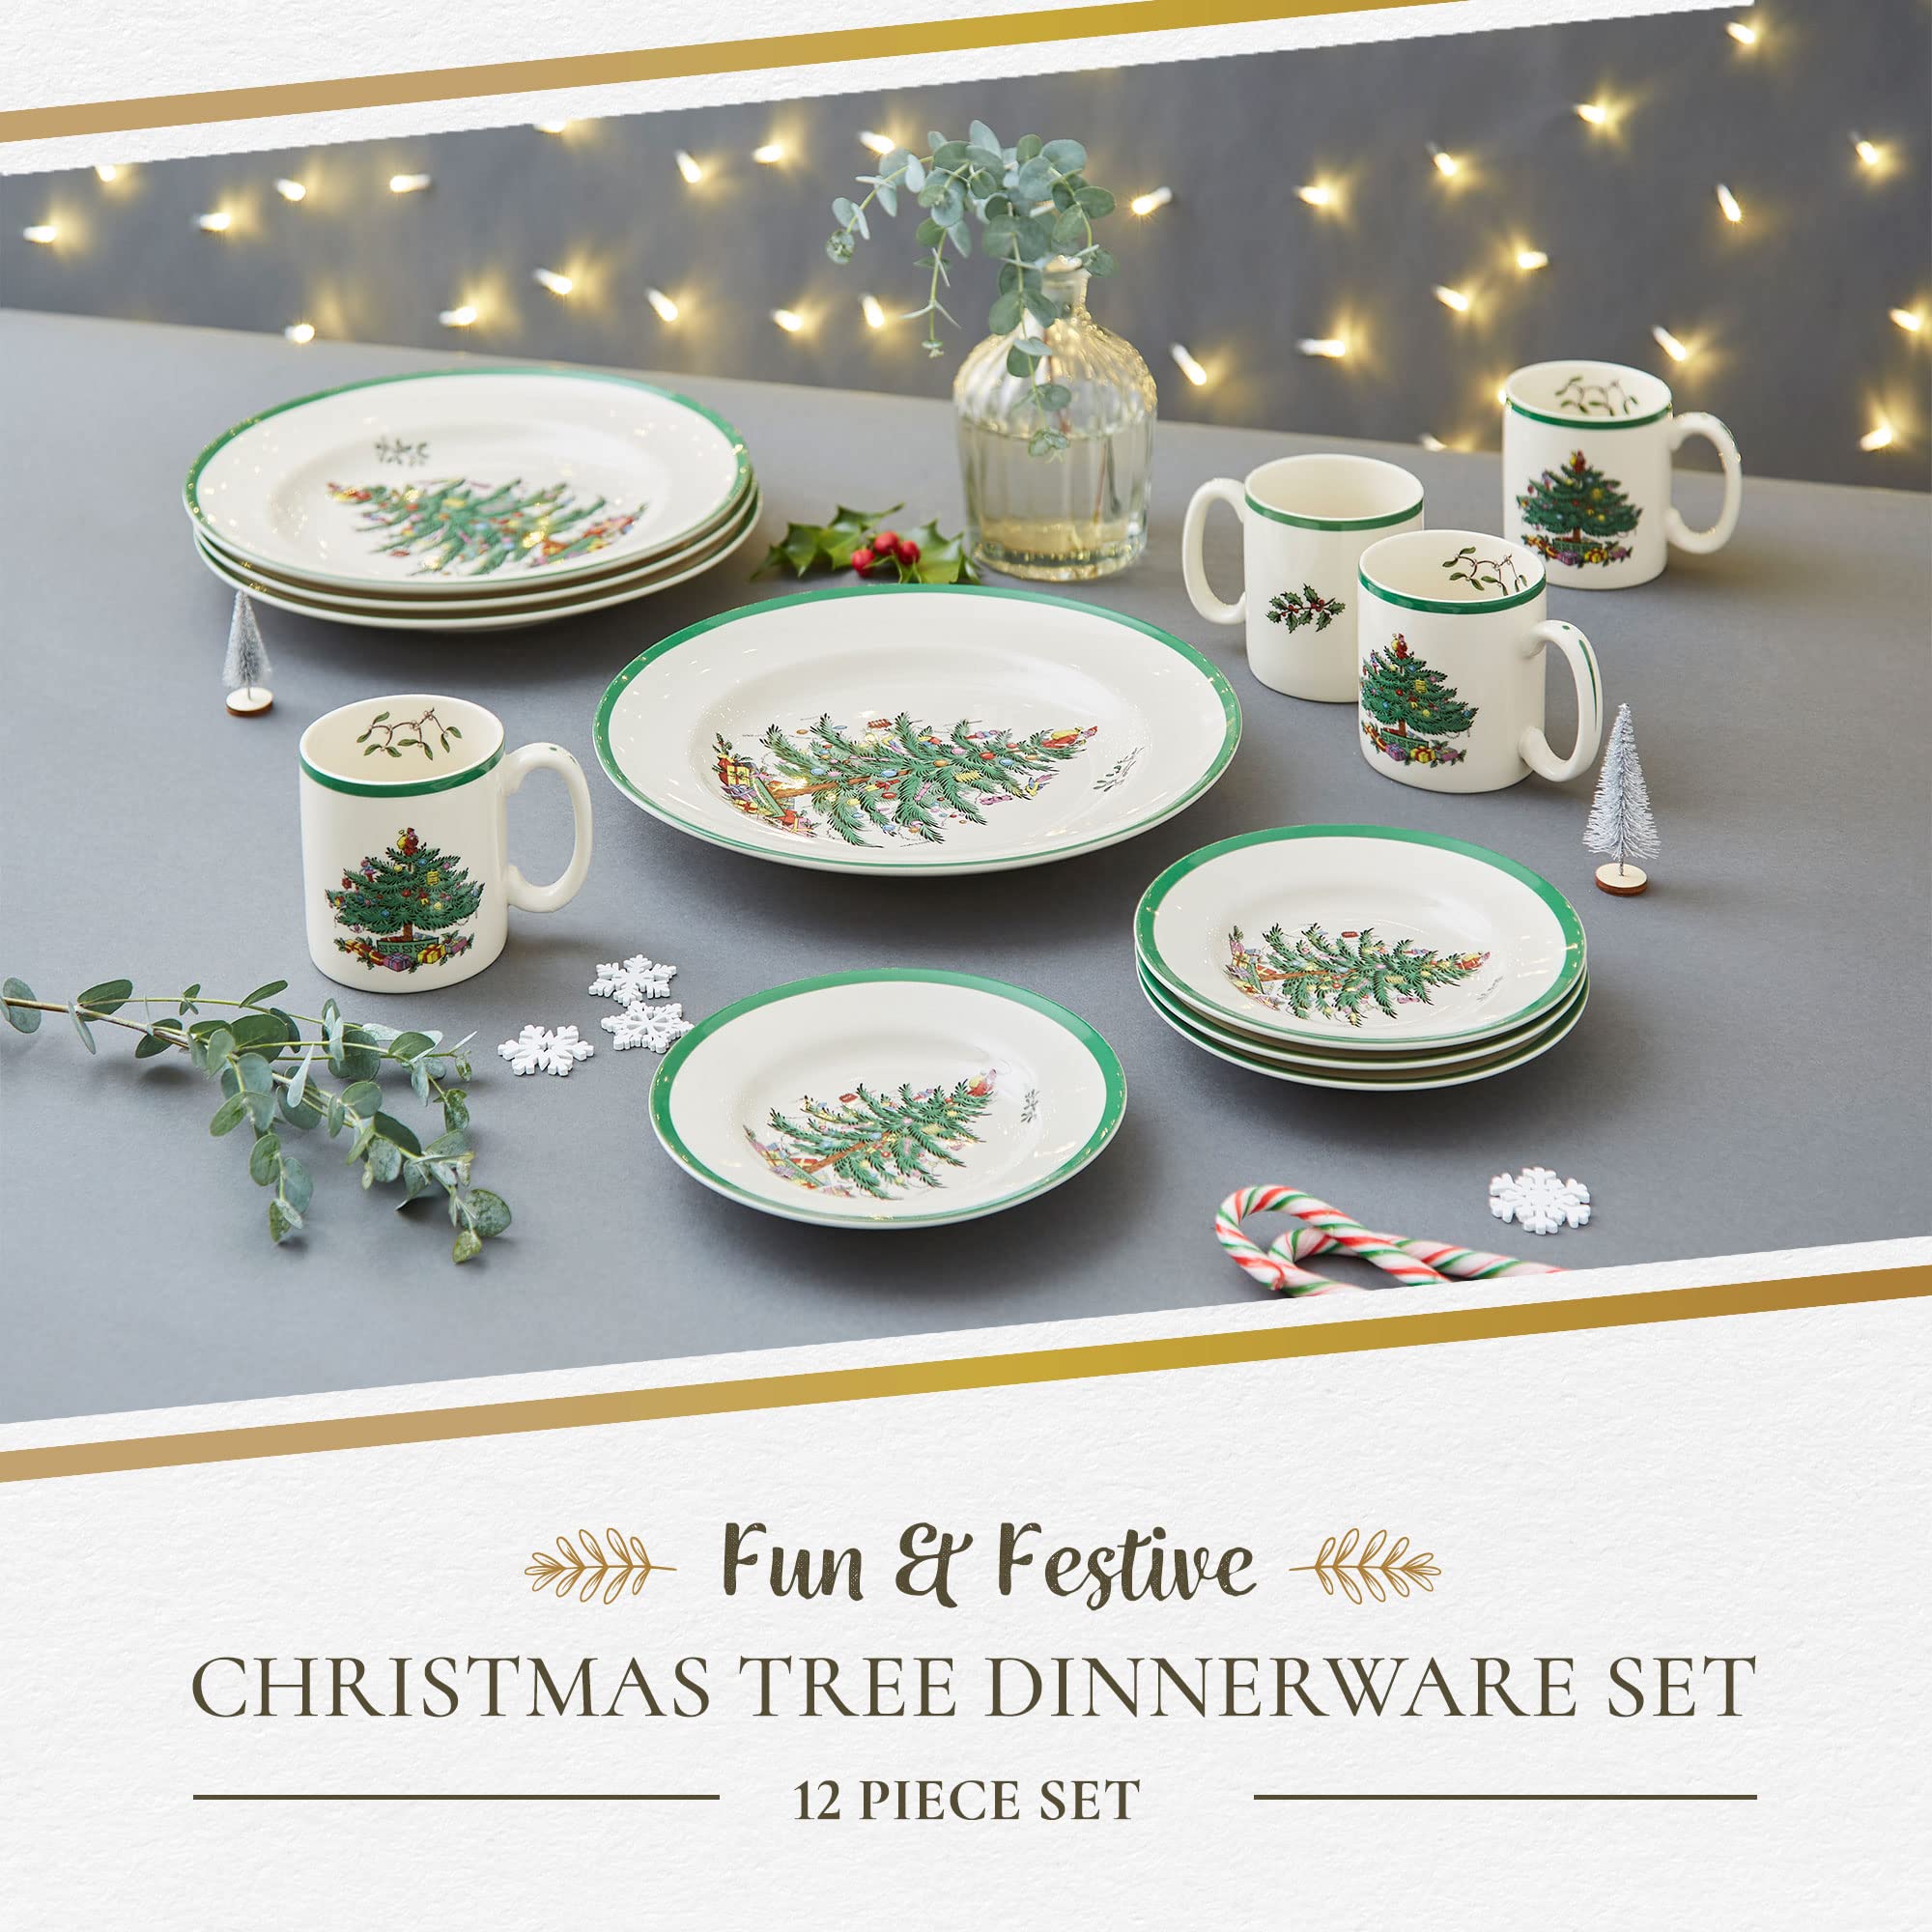 Spode Christmas Tree Dinner Plates | set of 4 Dinner Plates with Christmas Design | 10.5 Inch Christmas Dinnerware Made of Fine Earthenware | Dishwasher and Microwave Safe